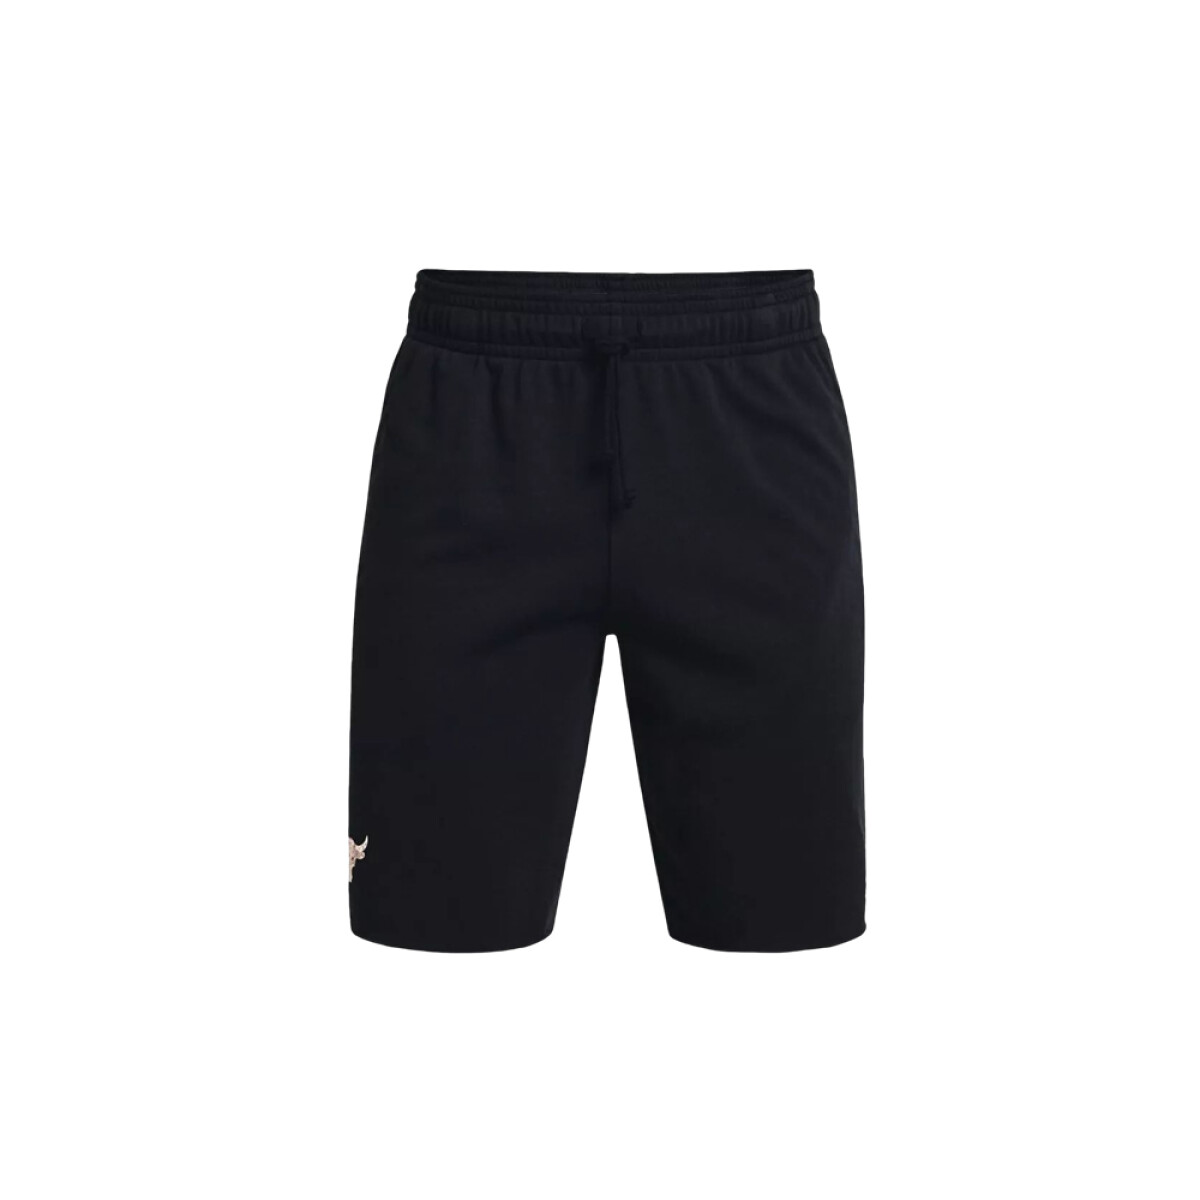 SHORT UNDER ARMOUR PROJECT ROCK TERRY - Black 